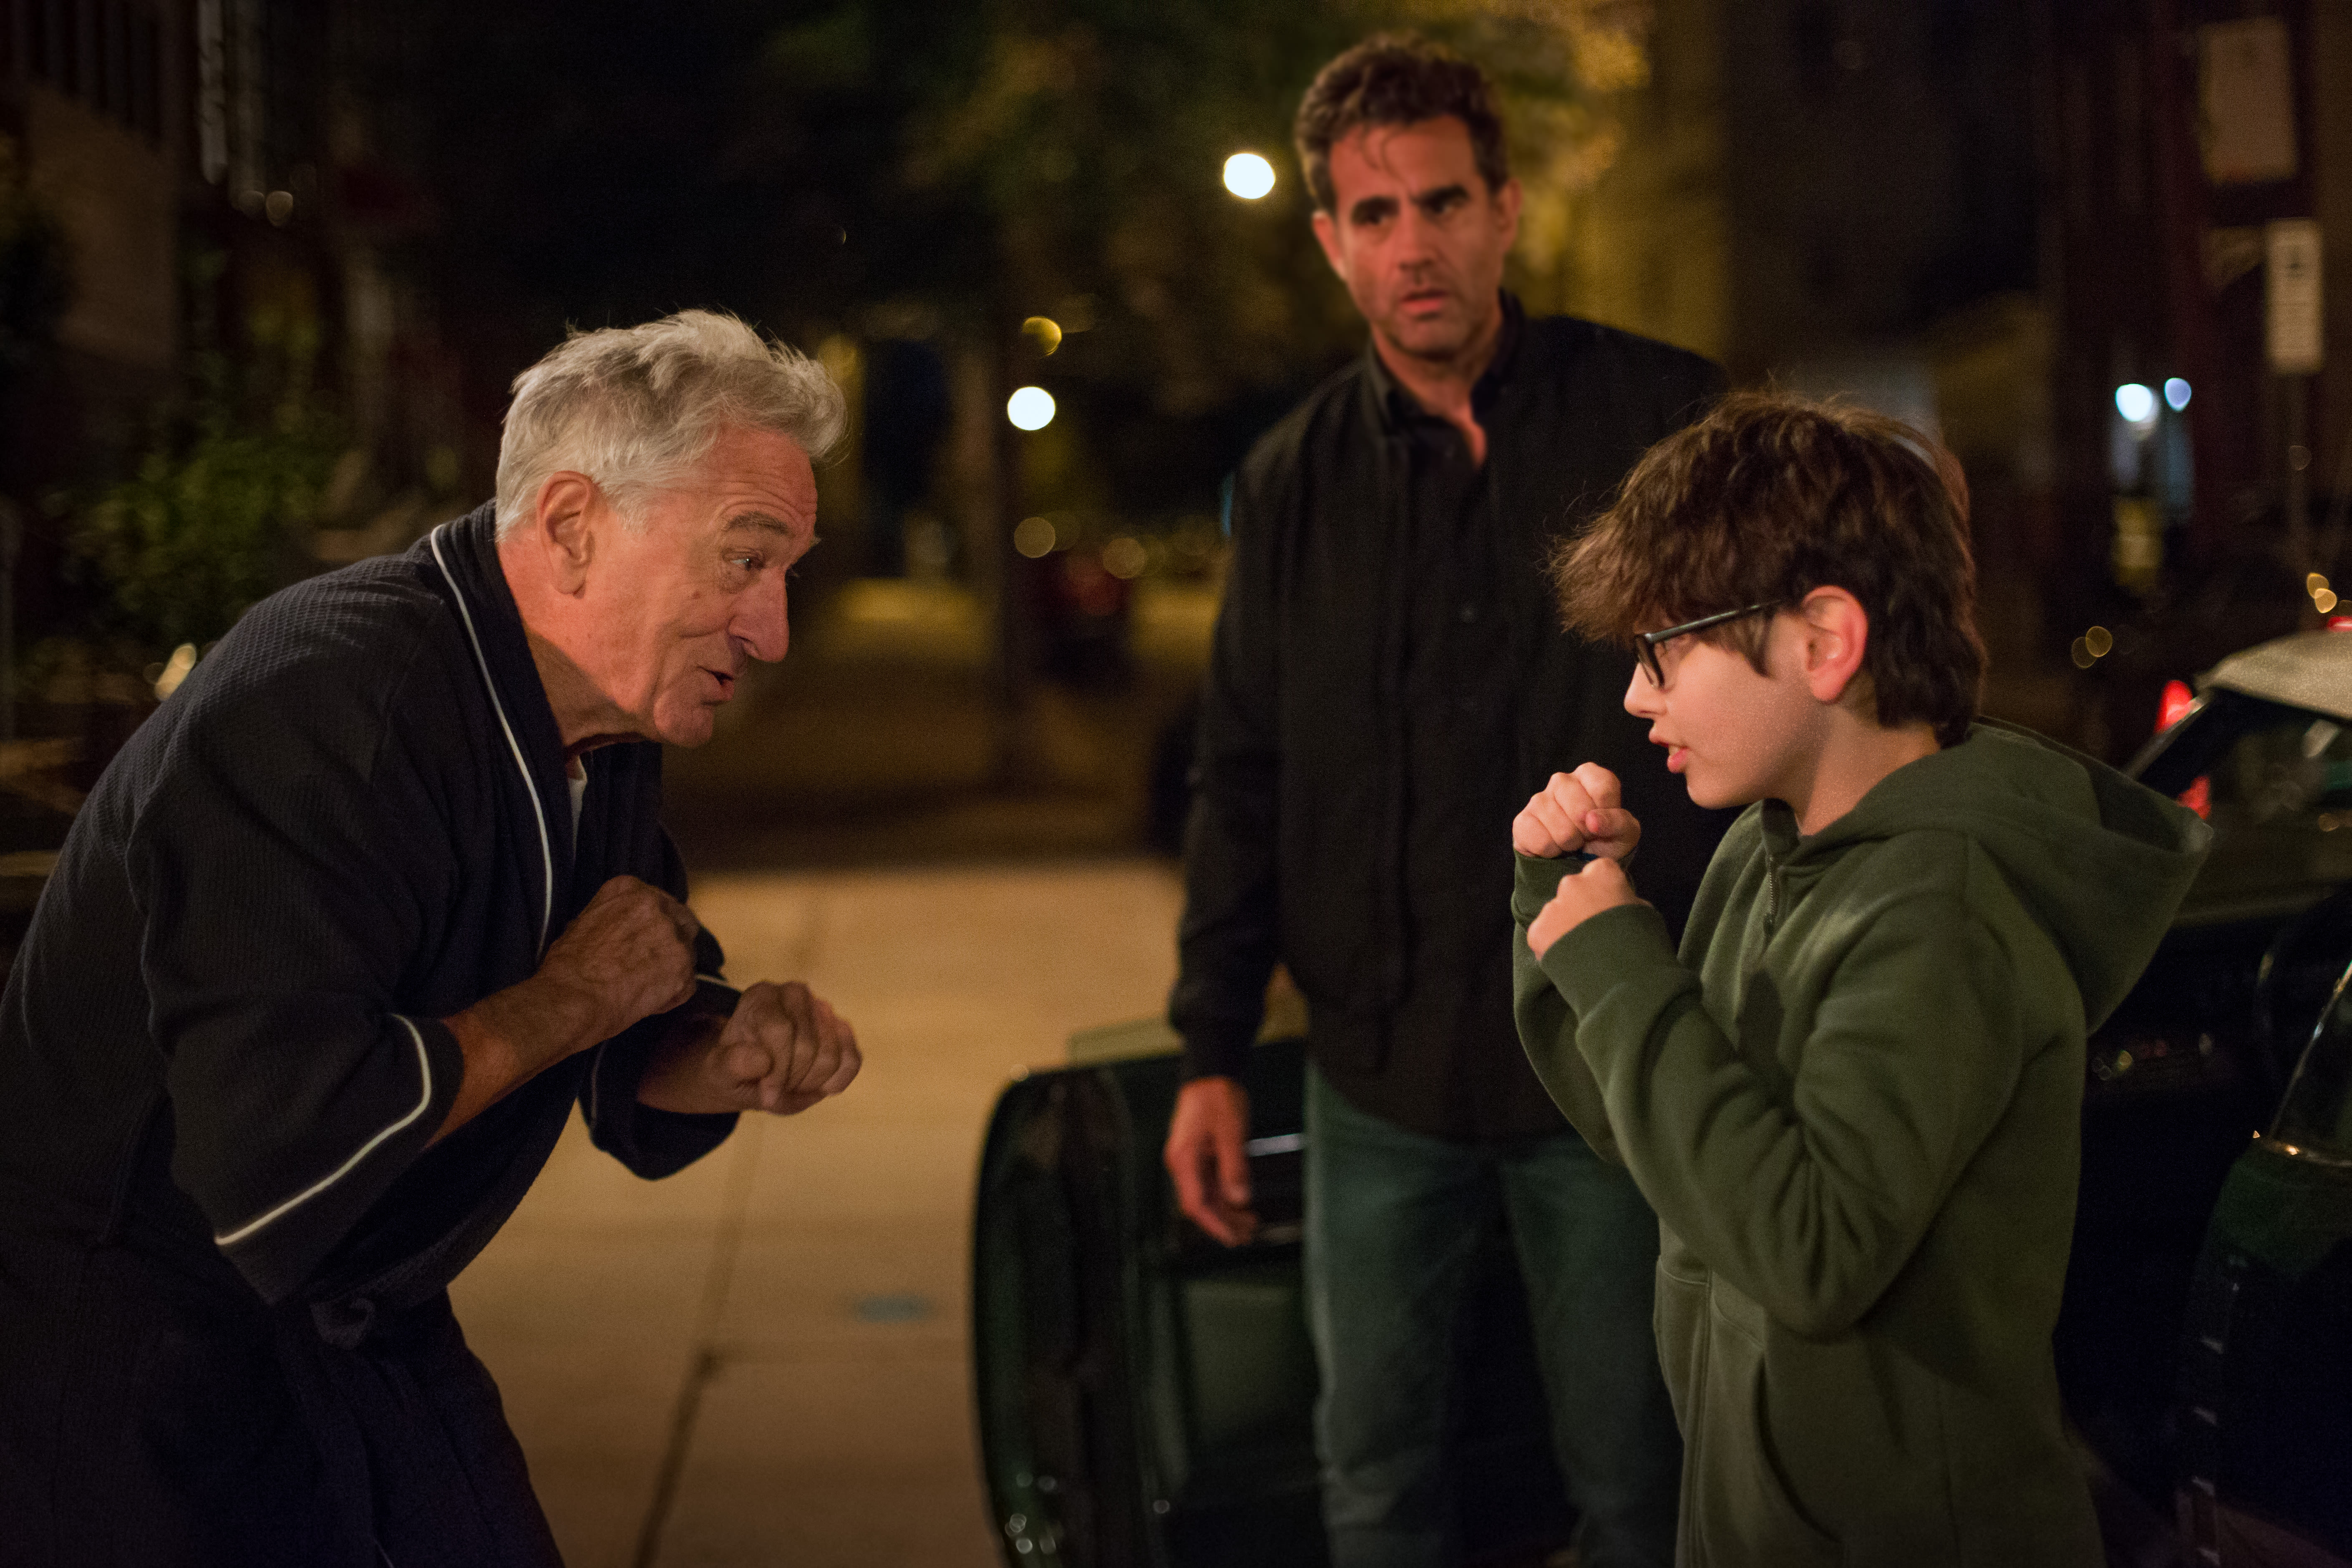 ‘Ezra’ Review: Bobby Cannavale Kidnaps His Autistic Son in a Clunky but Honest Dramedy About Loving Kids on their Own Terms